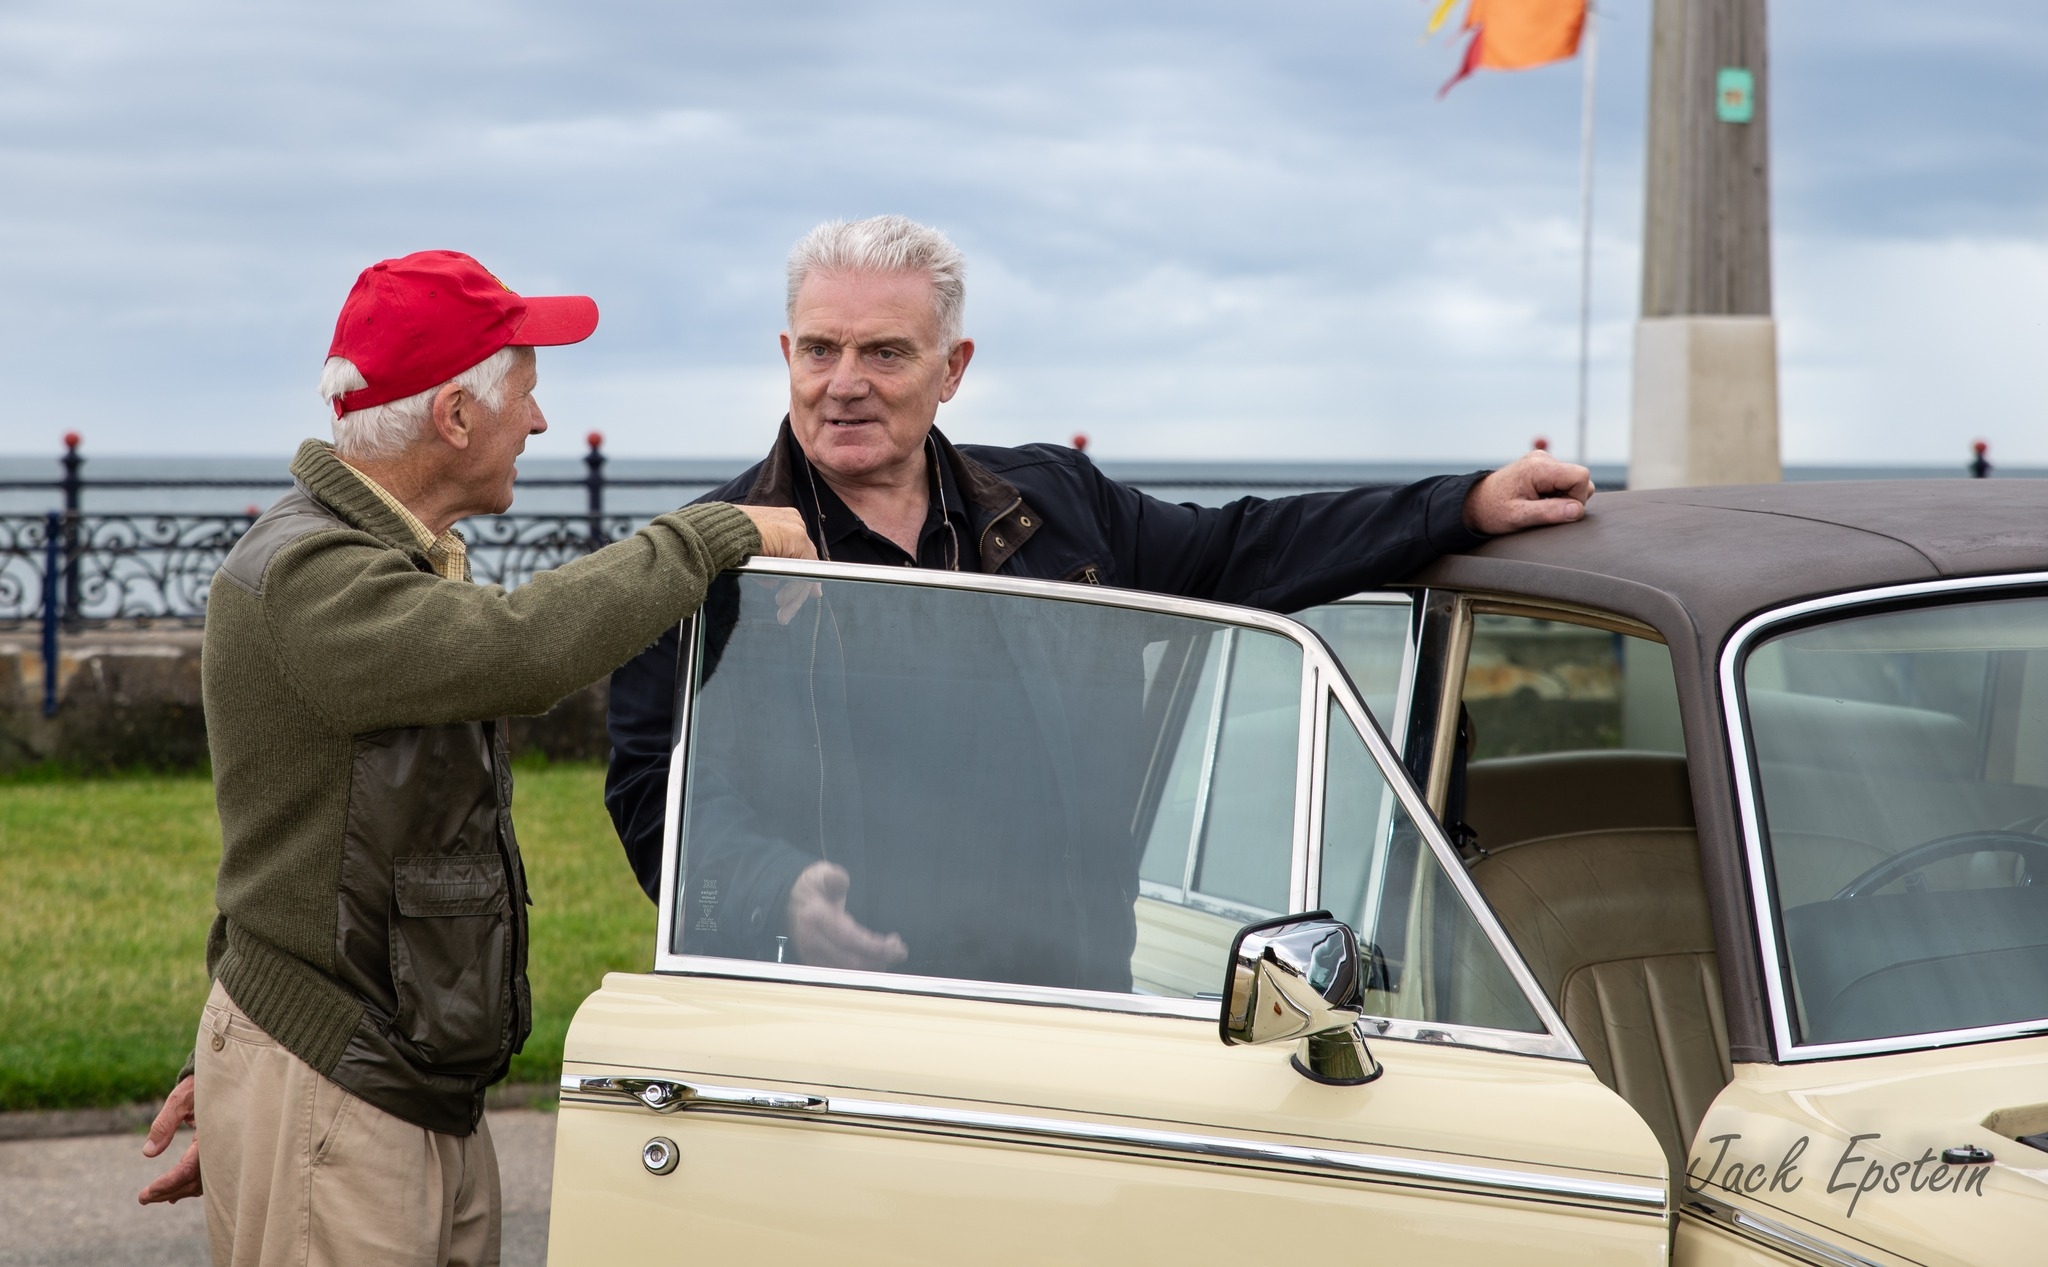 image of kevin byrne standing with a man while his hand is rested on his vintage car